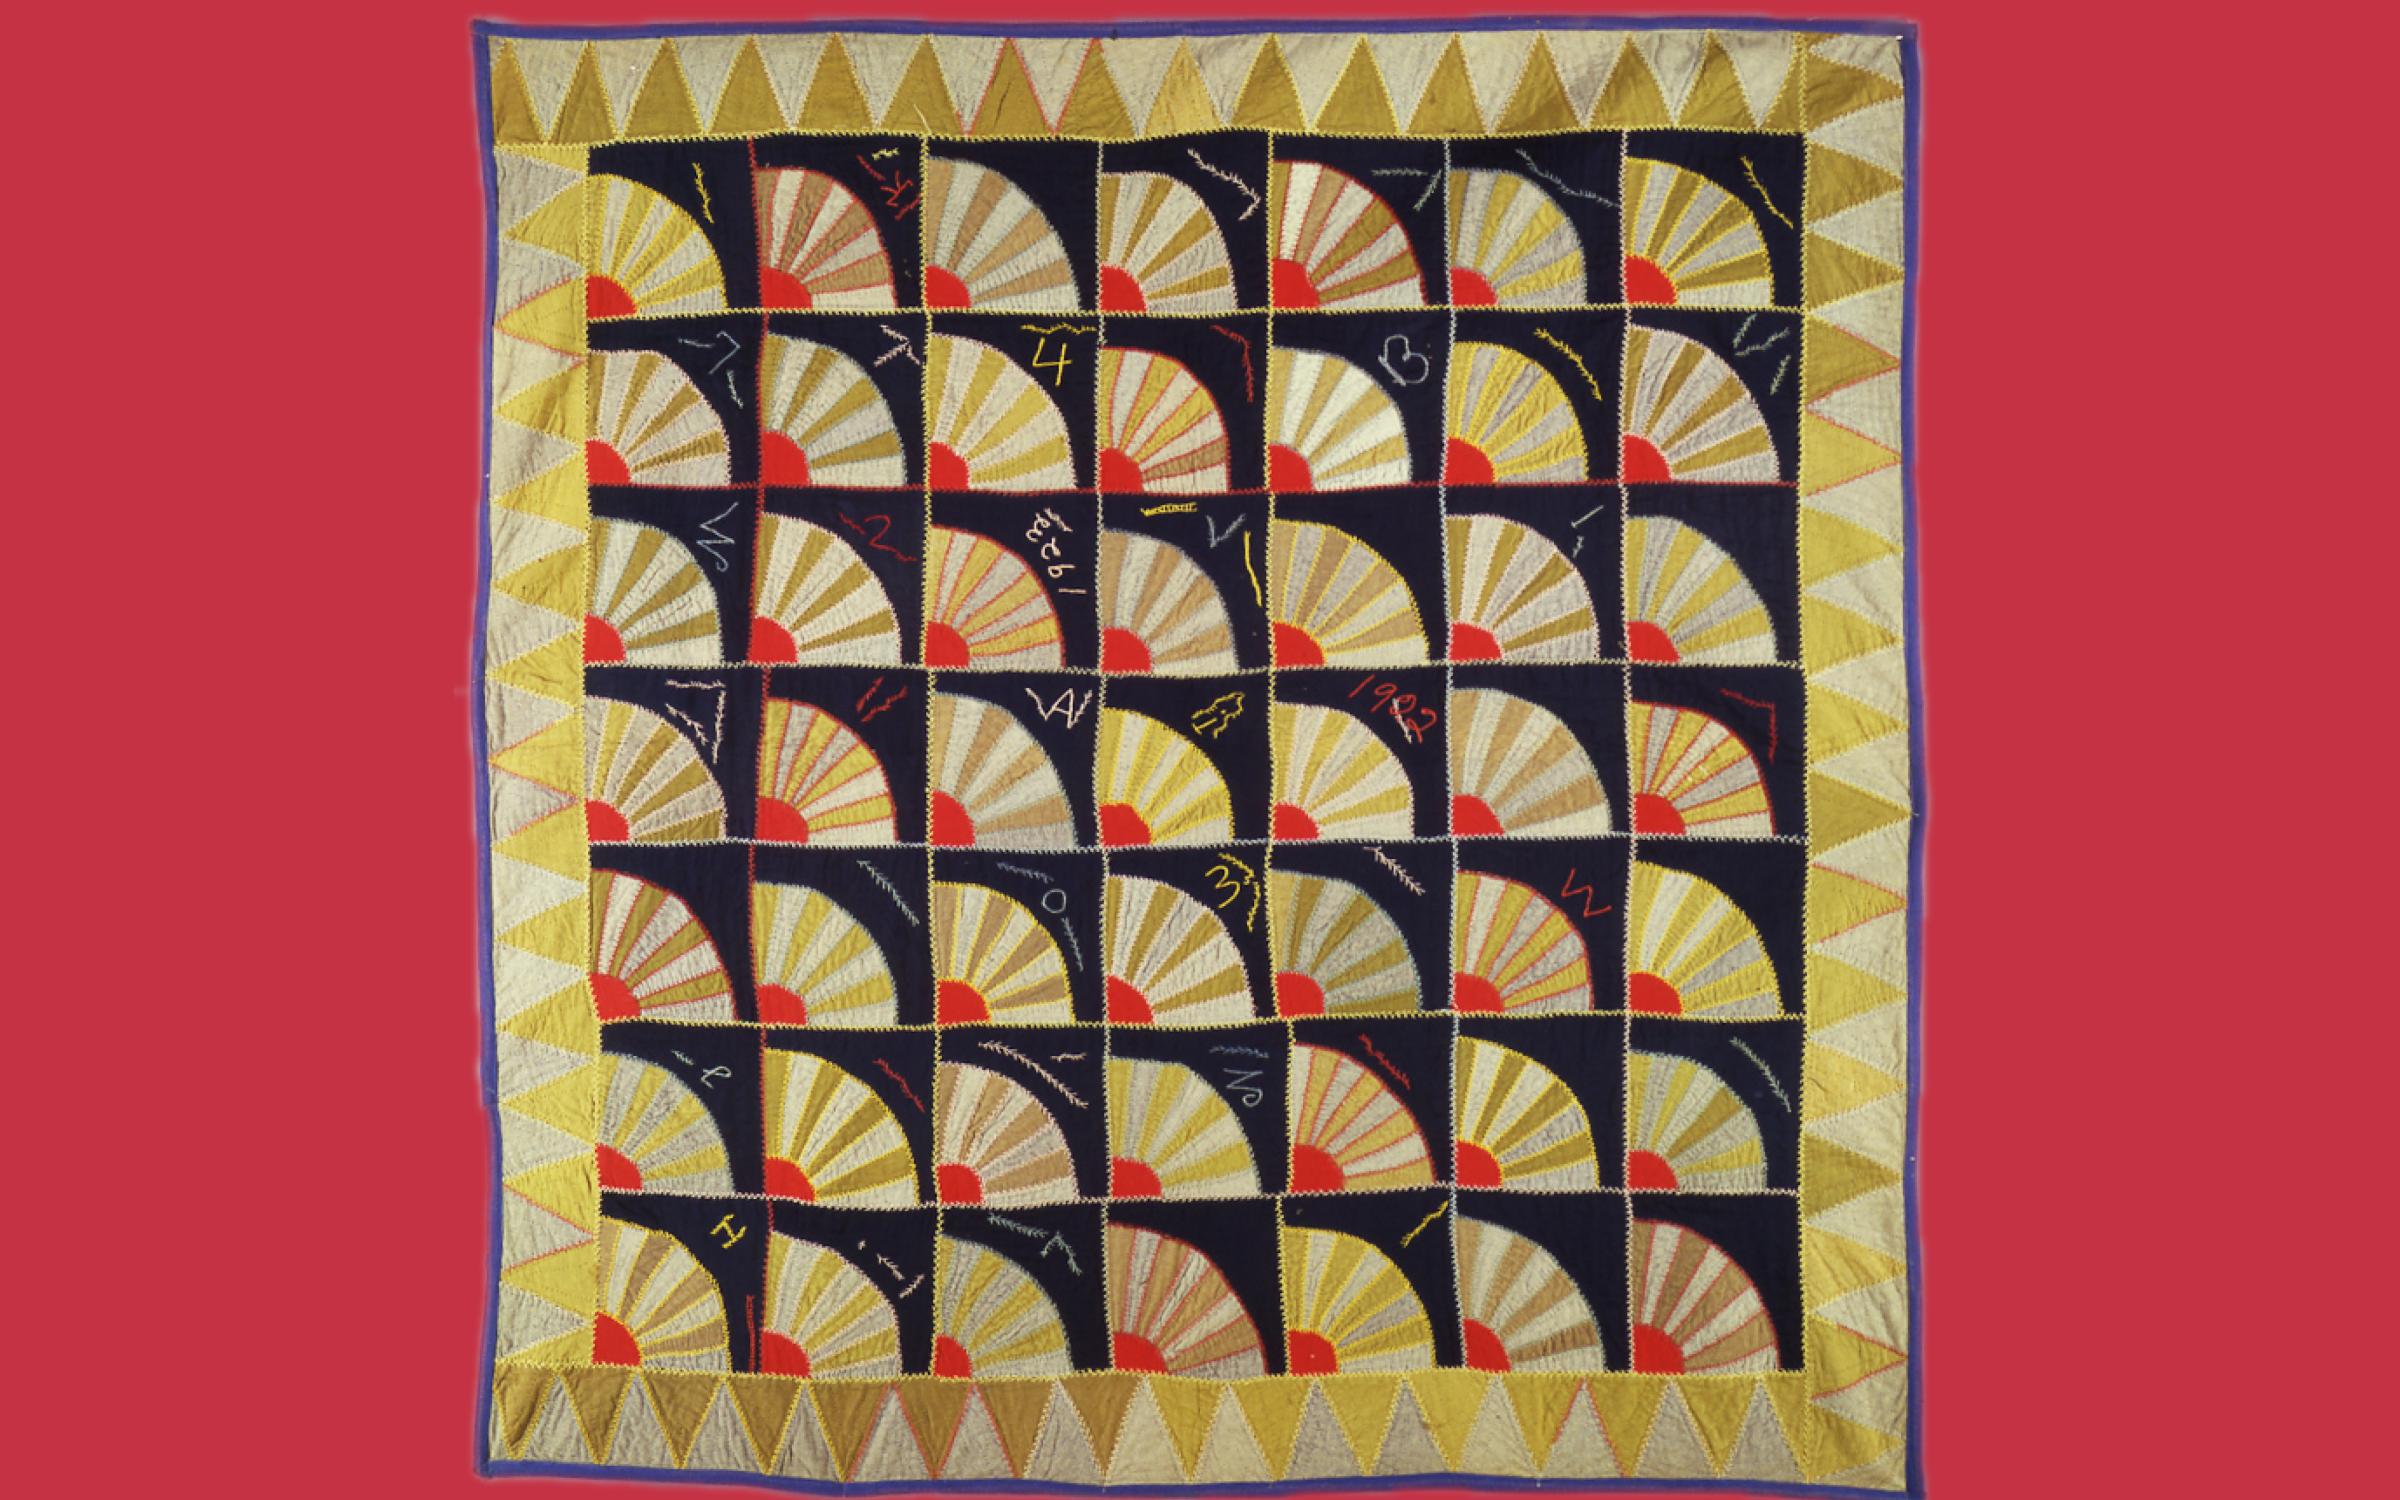 A photo of a large quilt with fans that are gold, red, and black.